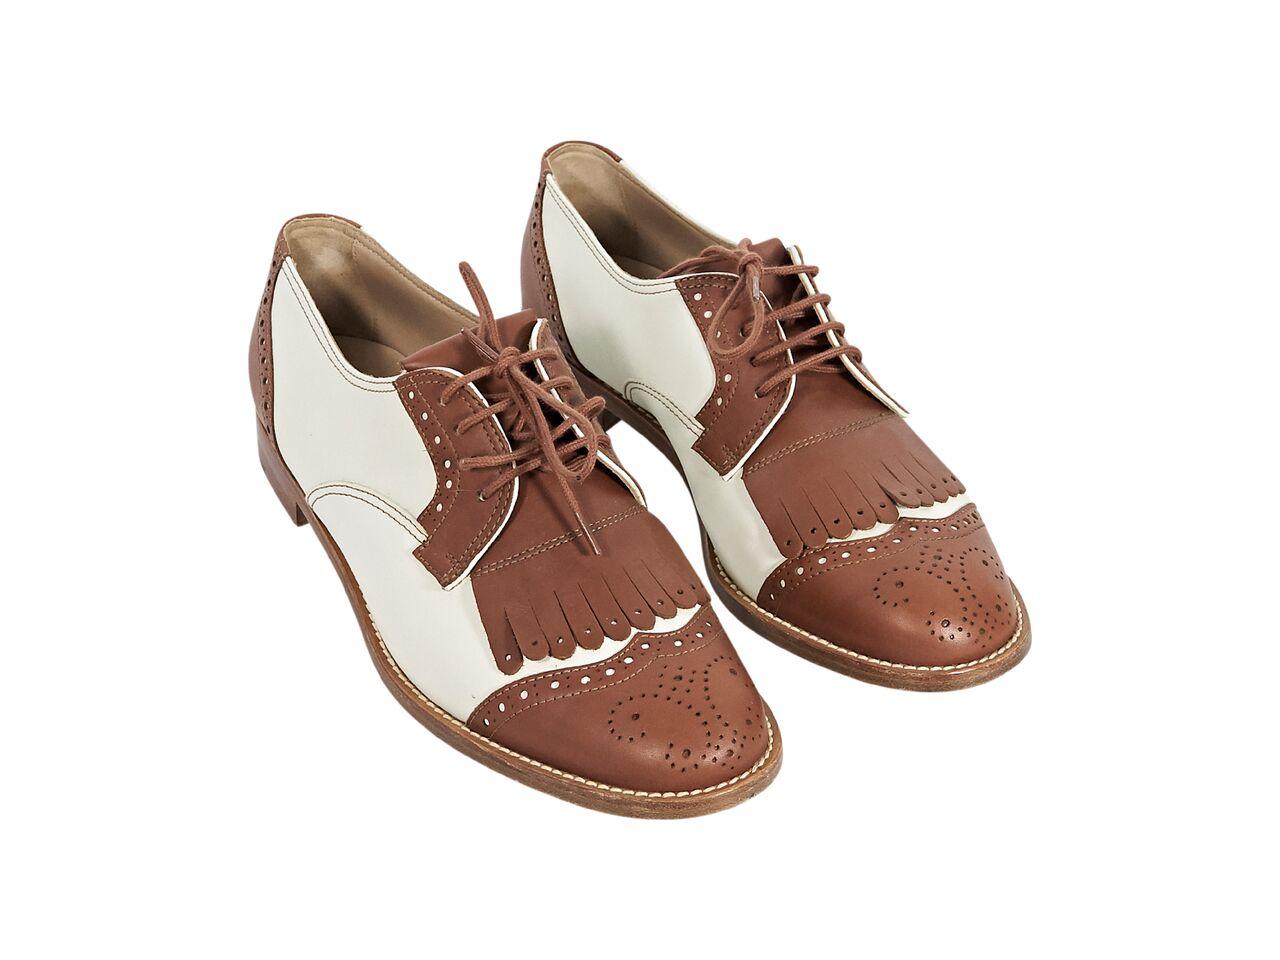 Product details:  White and brown leather oxfords by Manolo Blahnik.  Lace-up closure.  Round wingtip toe.  Low stacked heel.  1